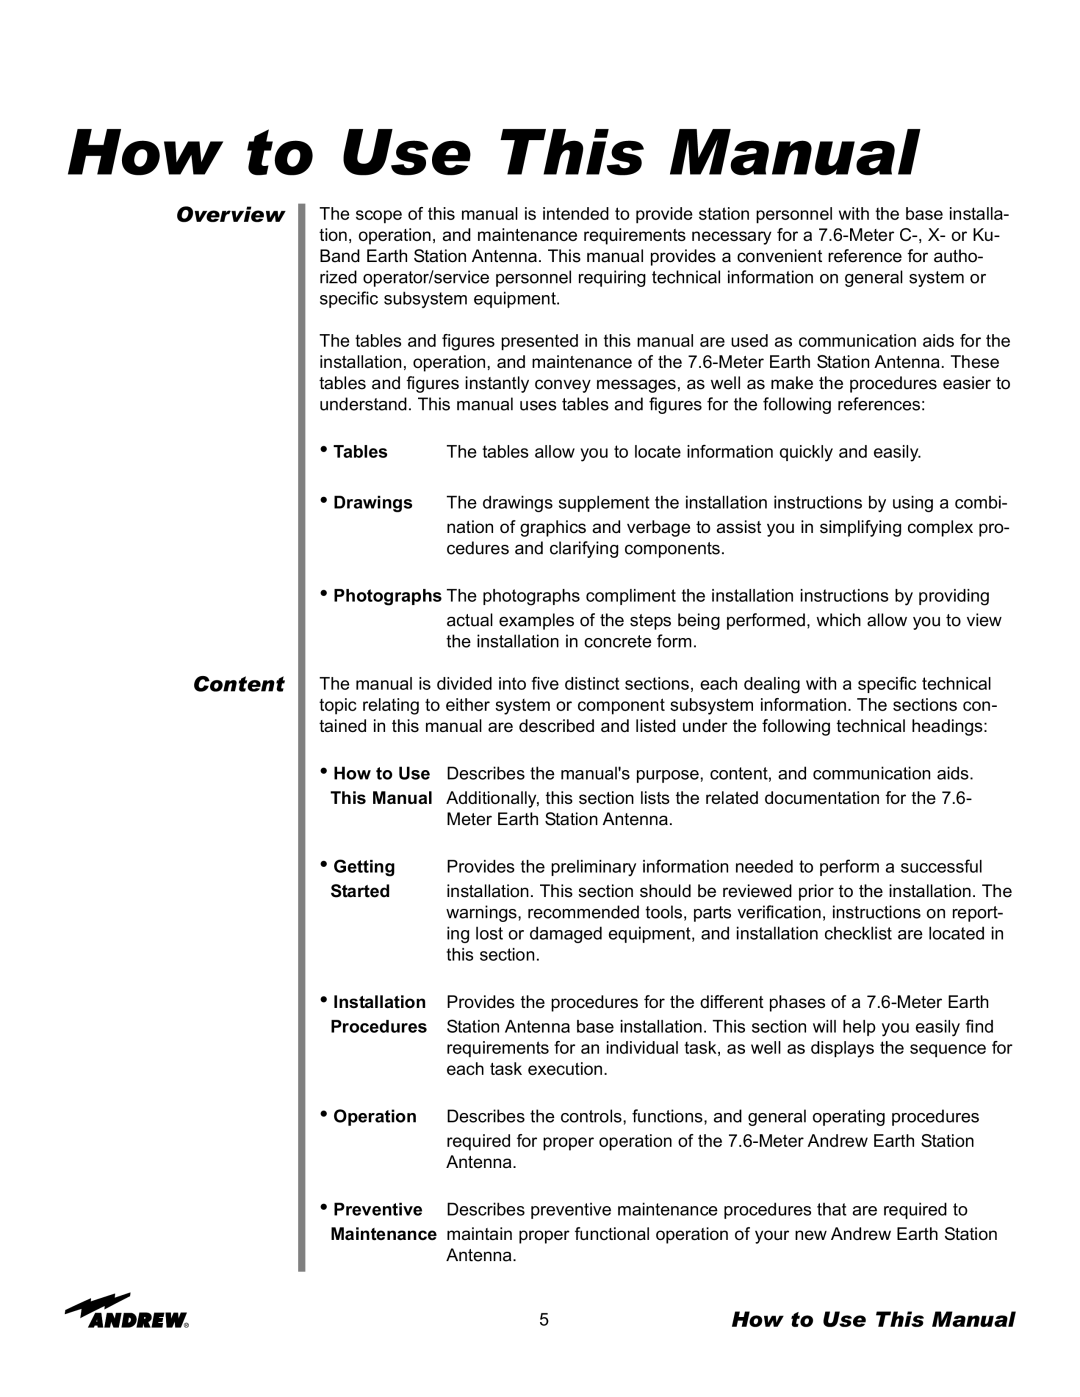 Andrew 7.6-Meter ESA manual How to Use This Manual, Overview Content 